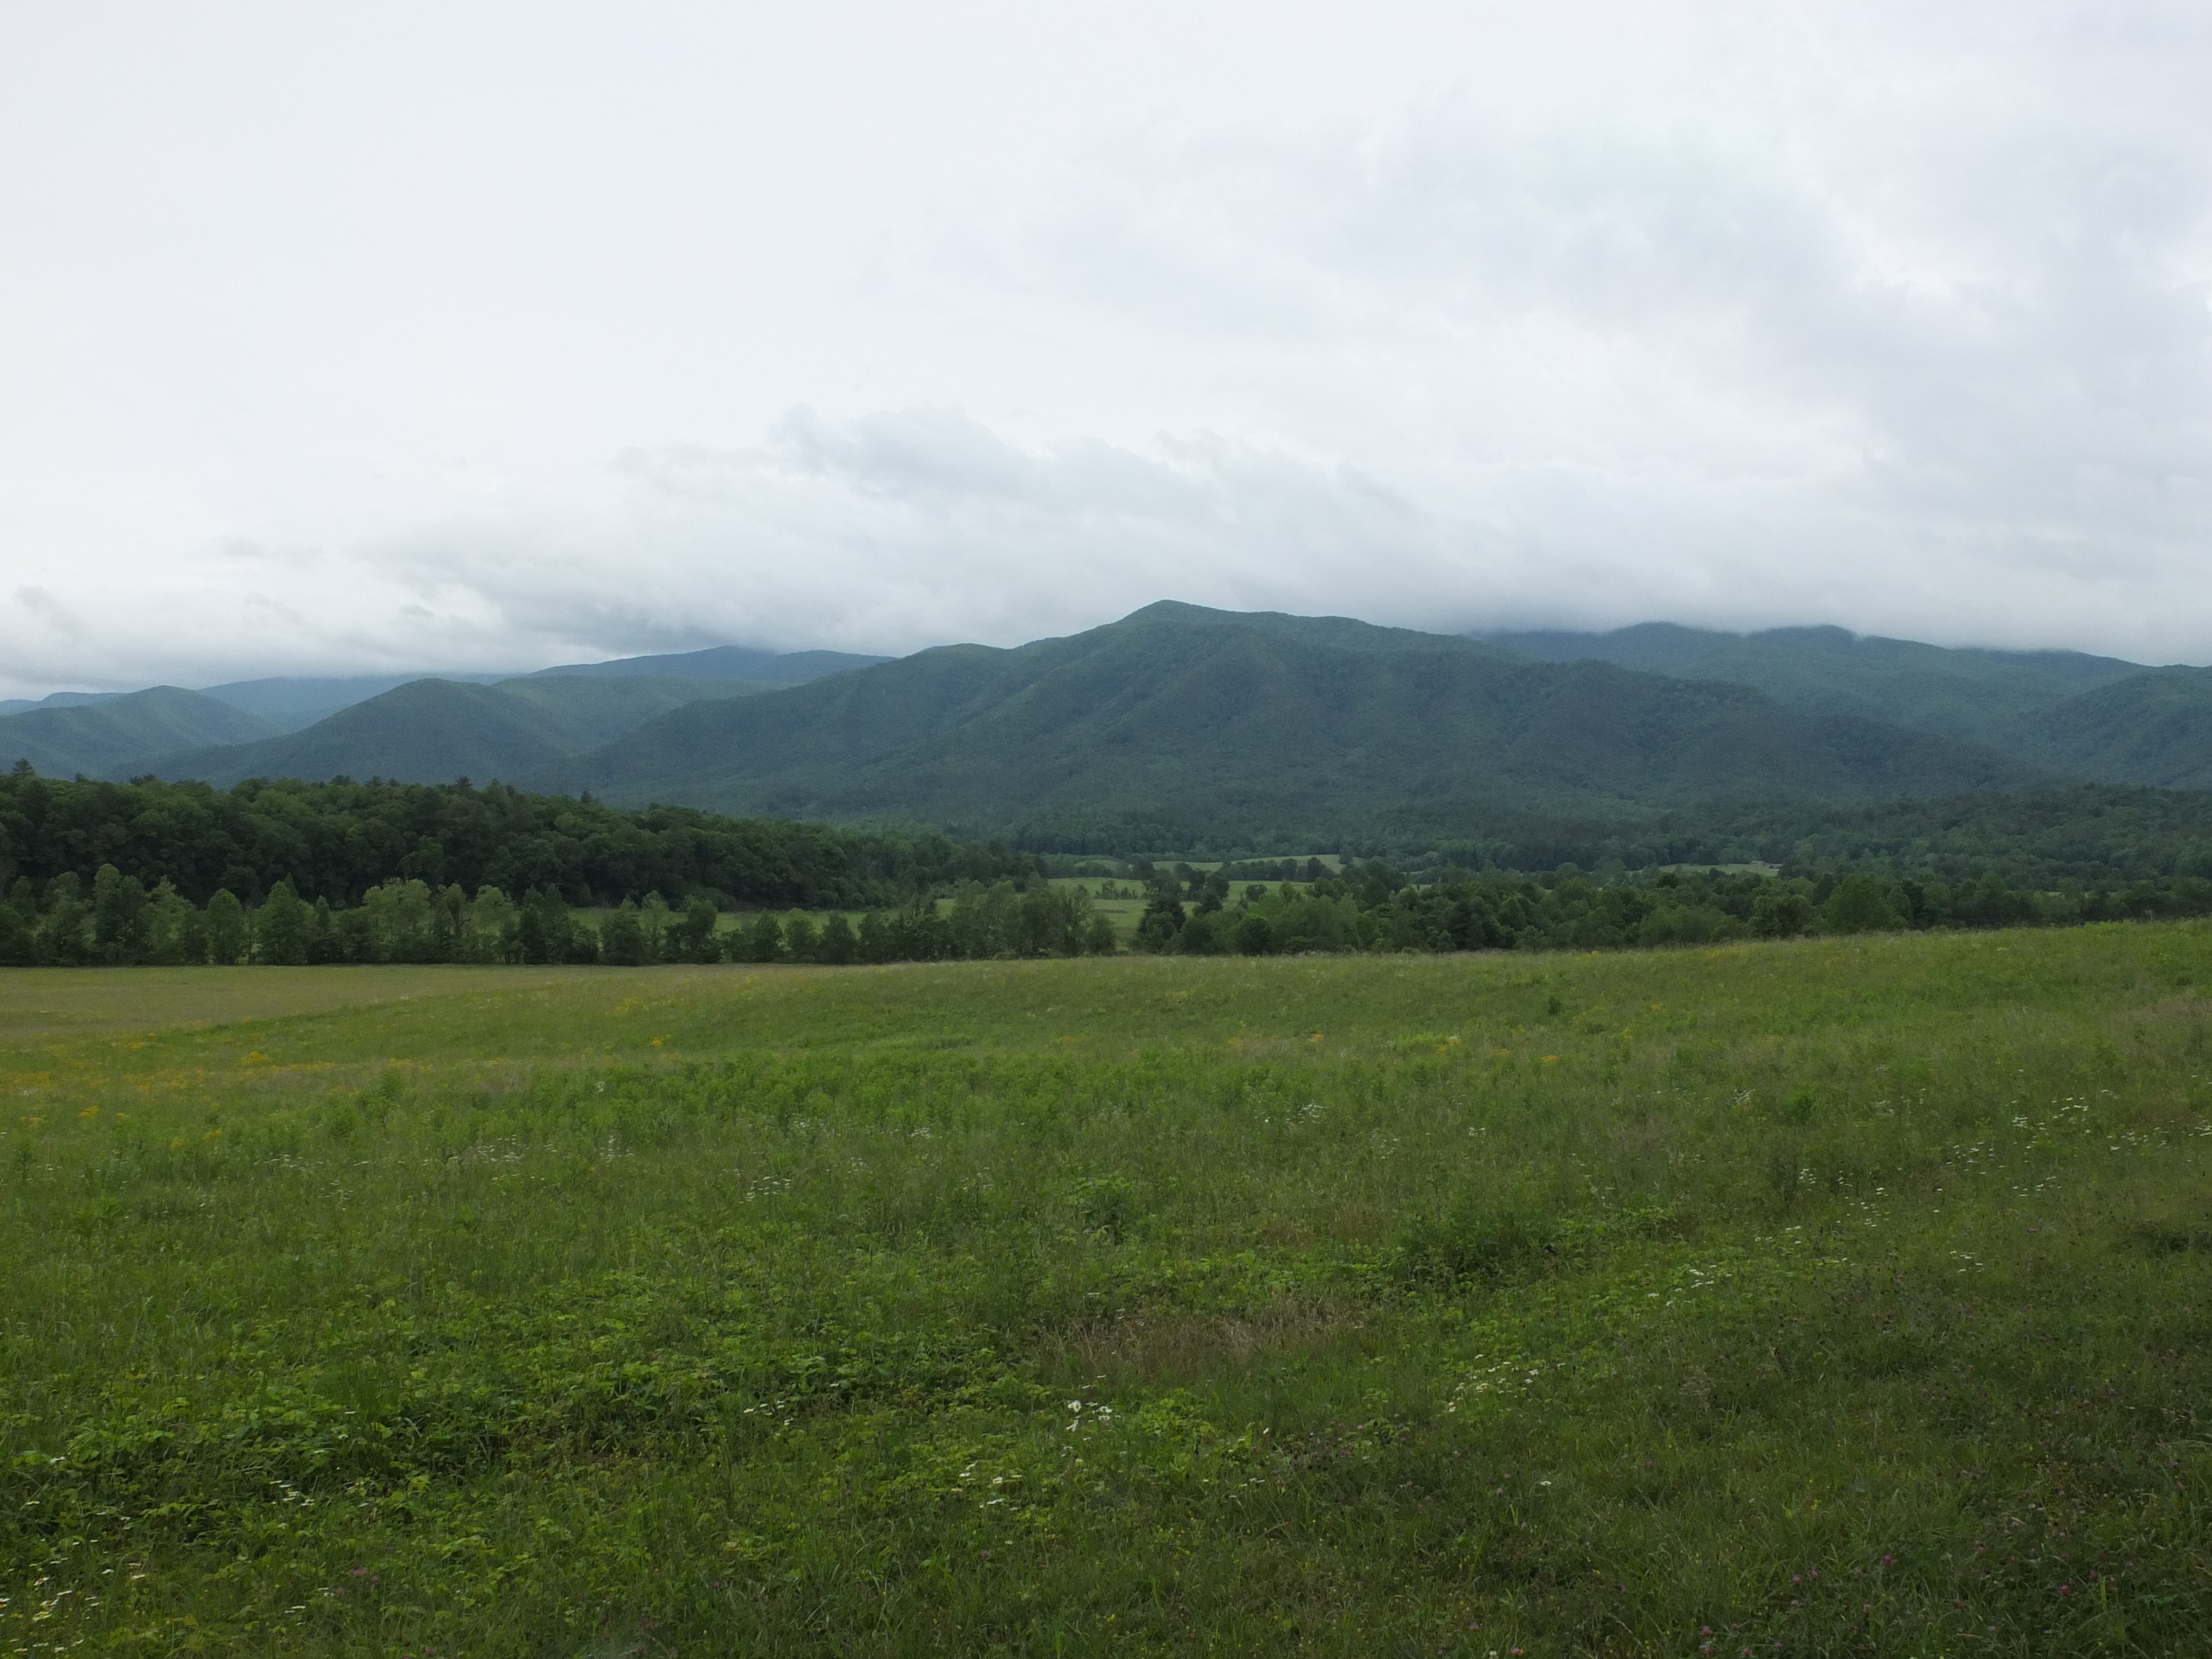 View from a pull-off in Cades Cove